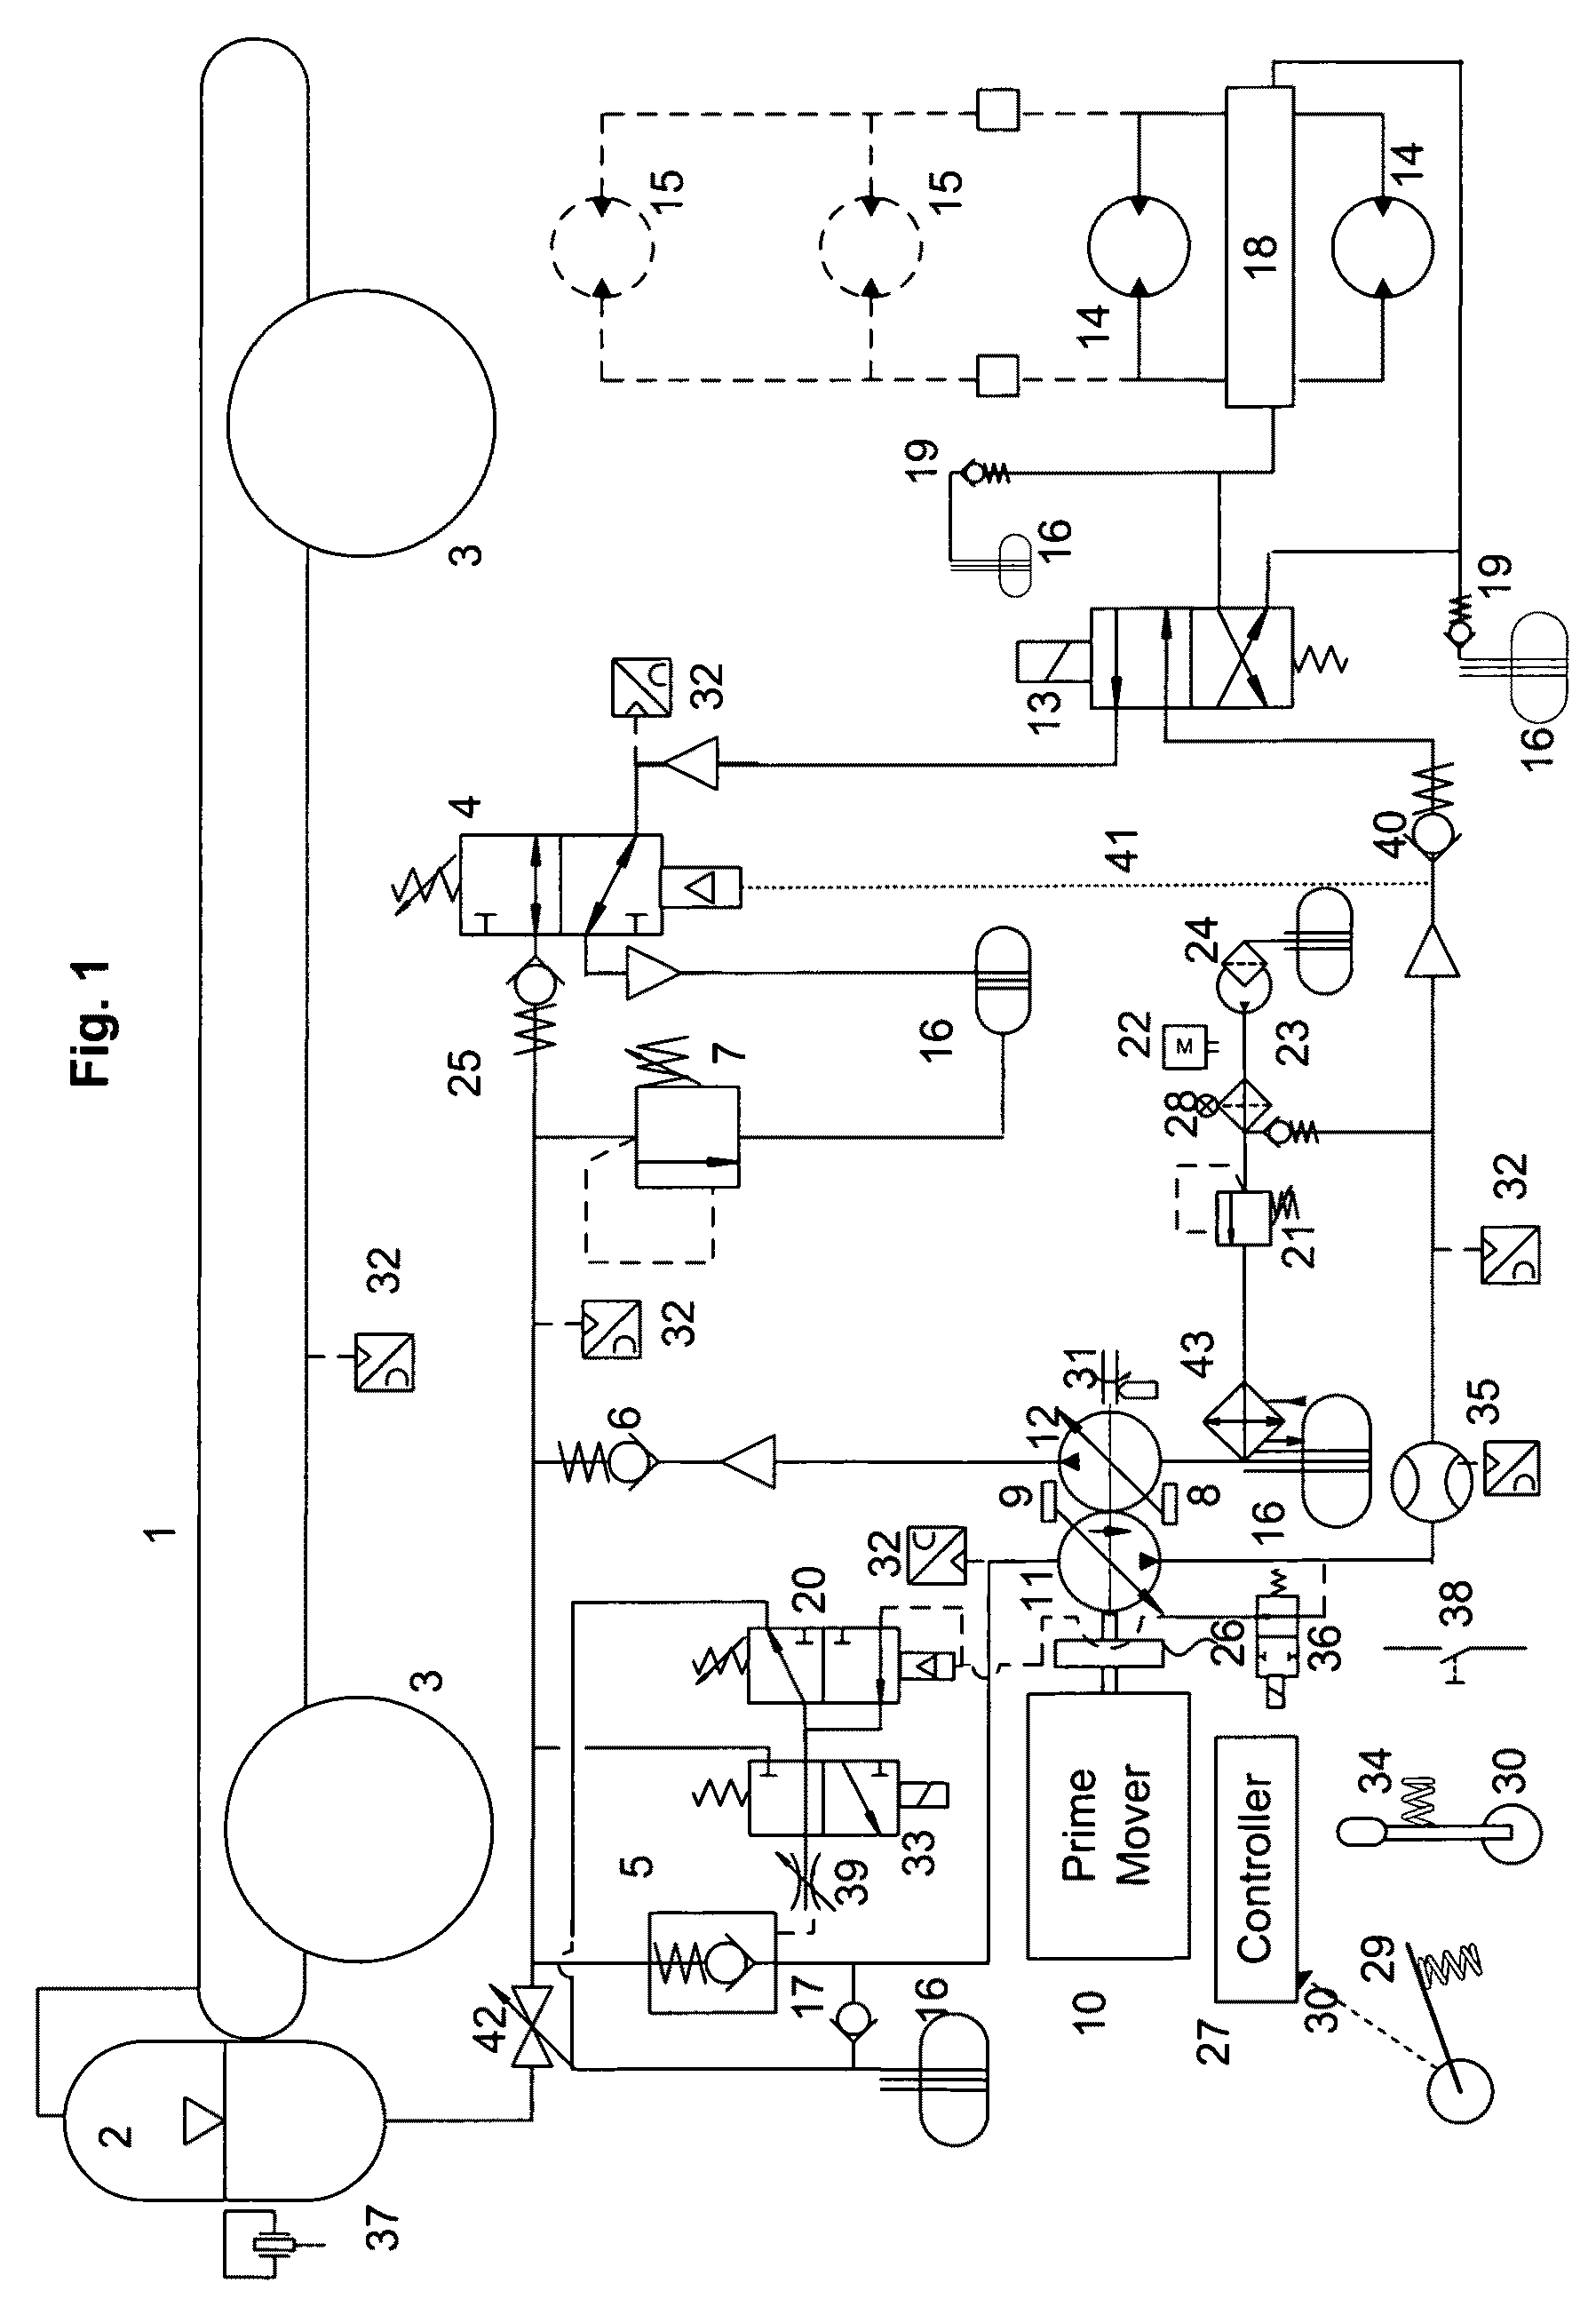 Hybrid hydraulic drive system with accumulator as the frame of vehicle